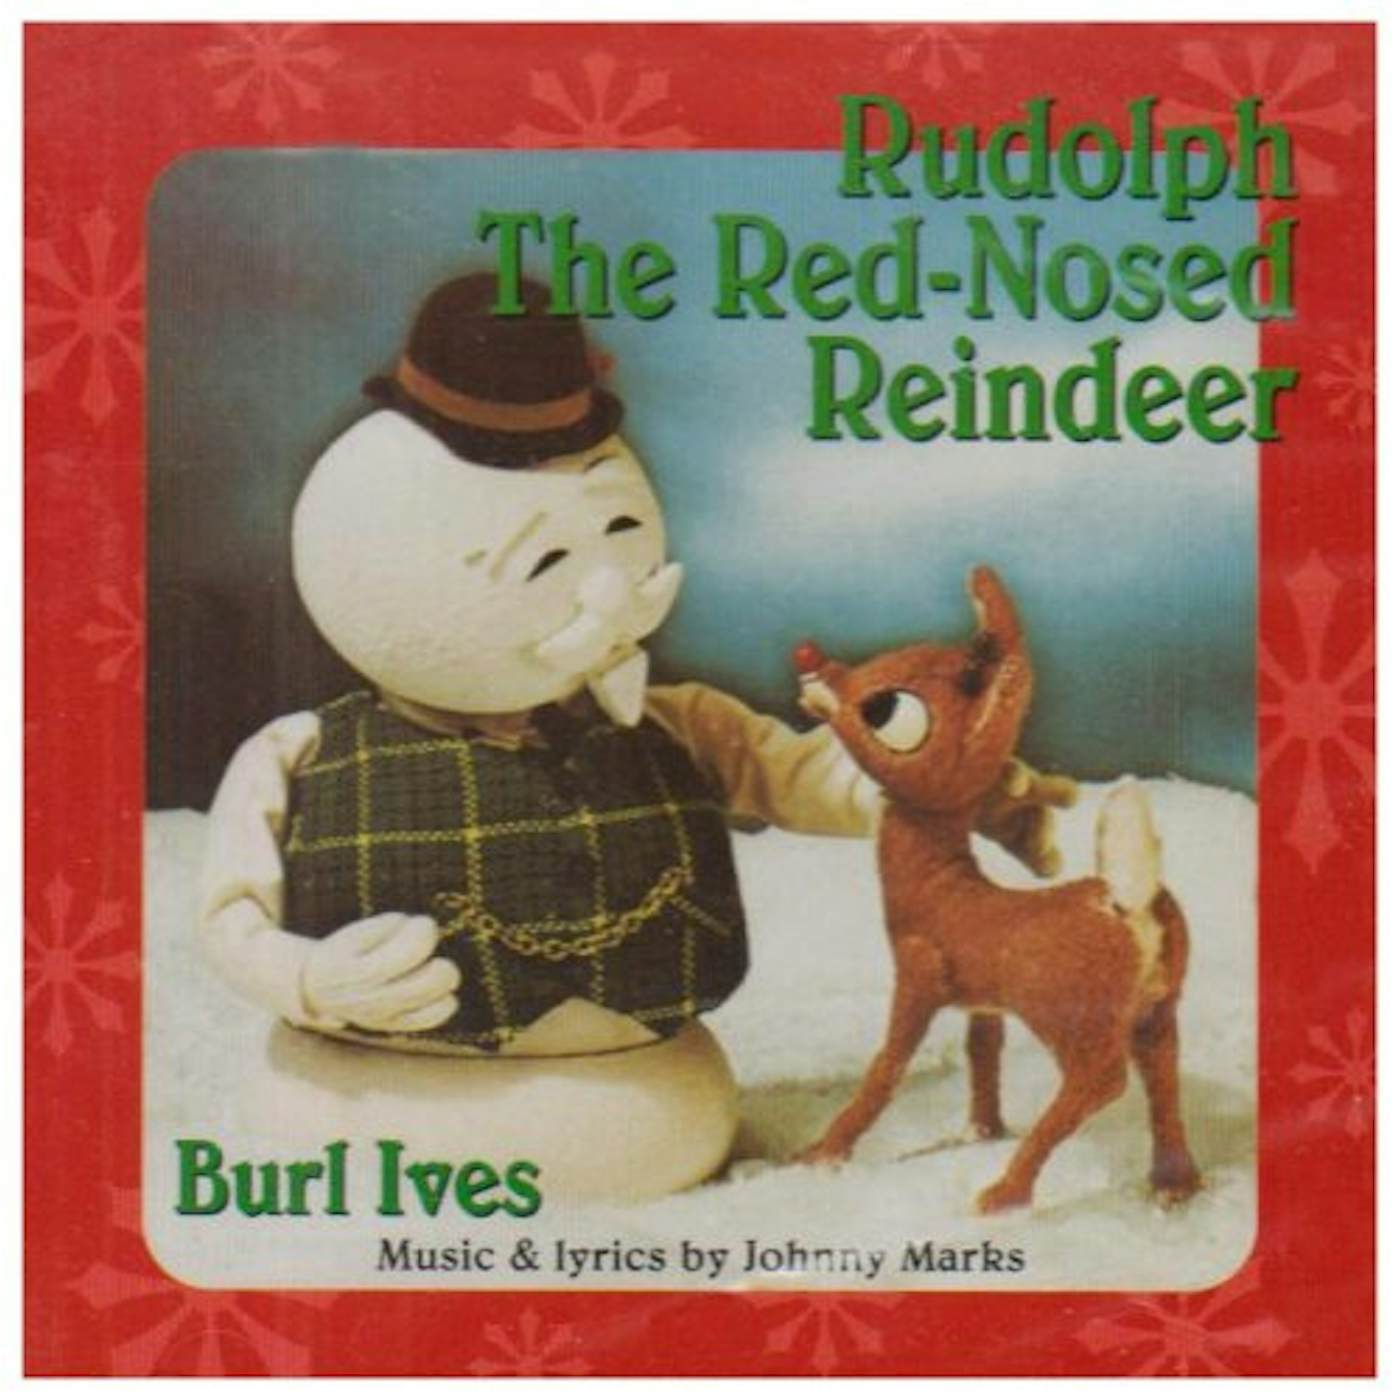 Burl Ives RUDOLPH THE RED-NOSED REINDEER CD